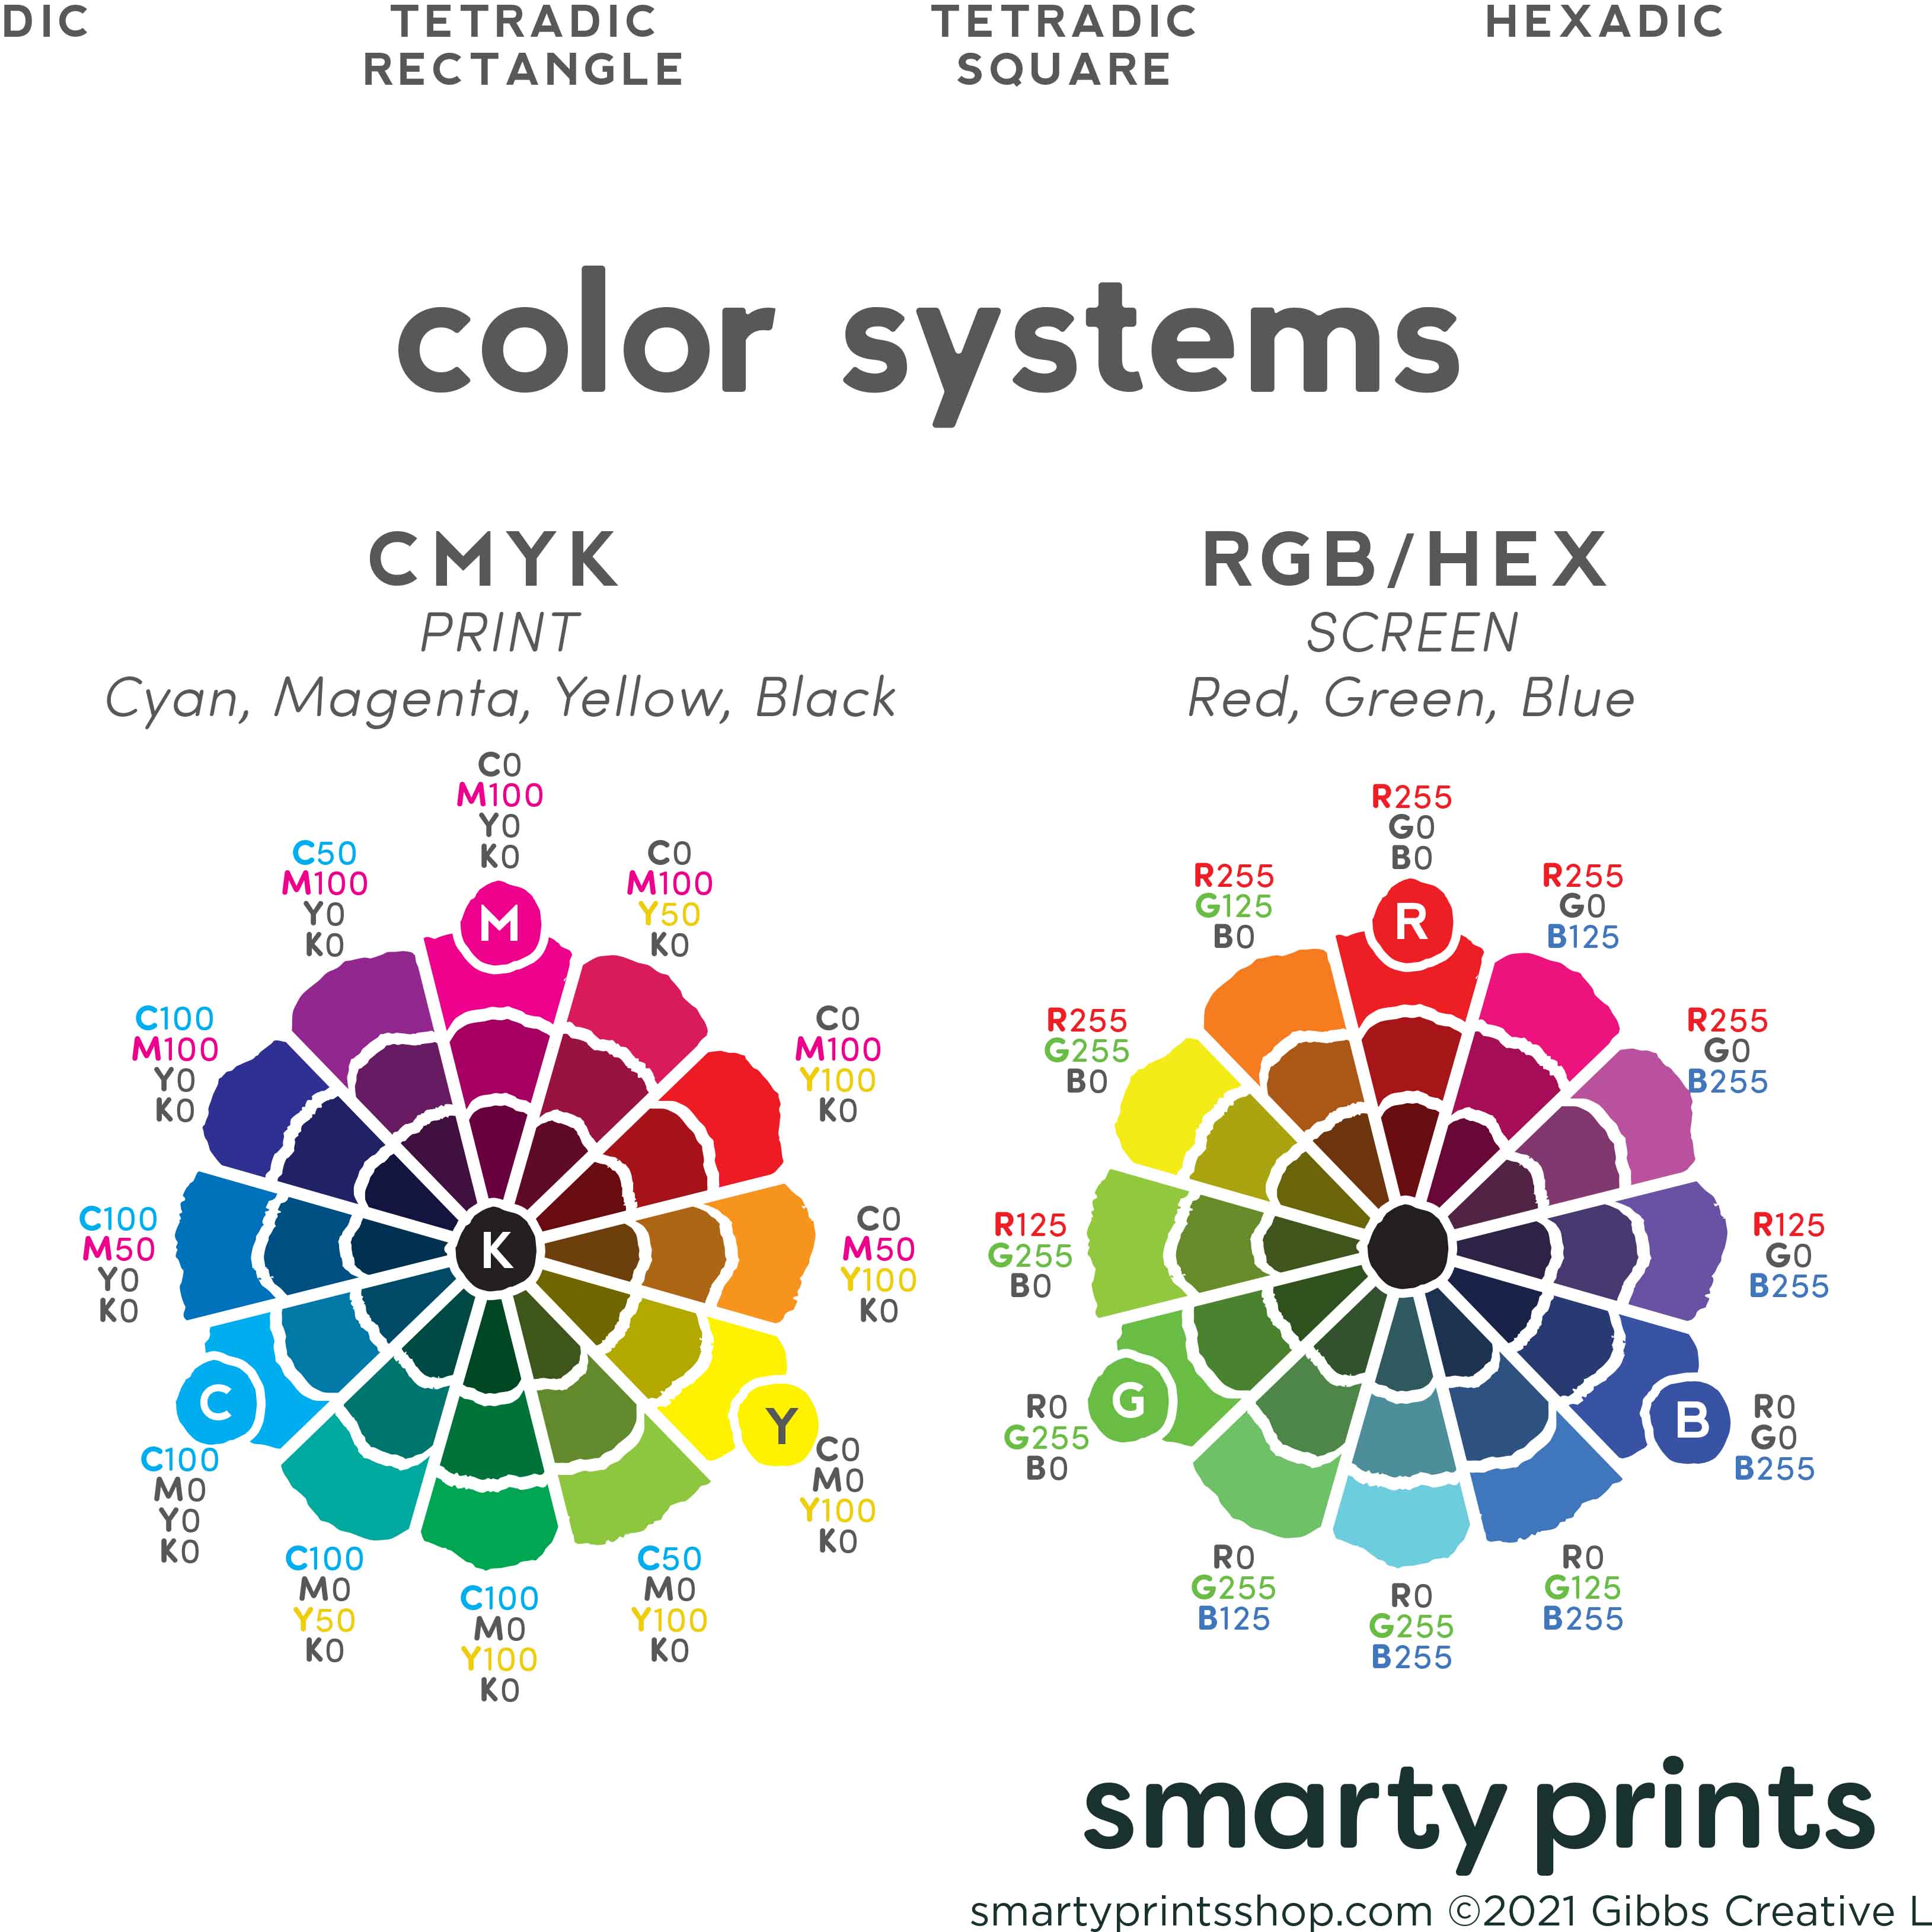 color theory, color wheel, red yellow blue color model, color mixing, color  system, color chart, color harmony, poster - AliExpress